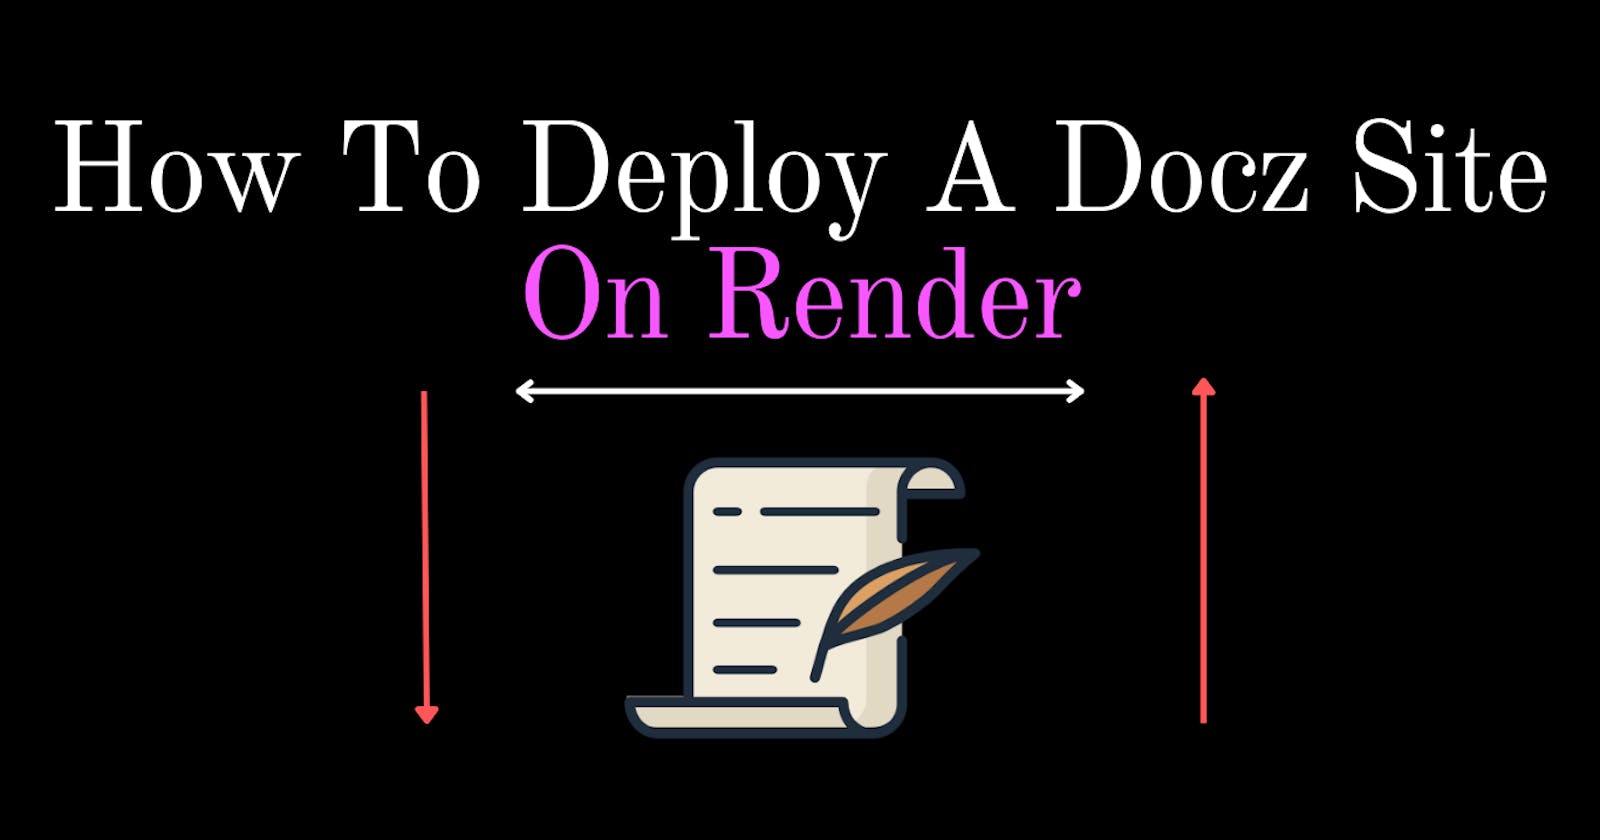 How To Deploy A Docz Site On Render